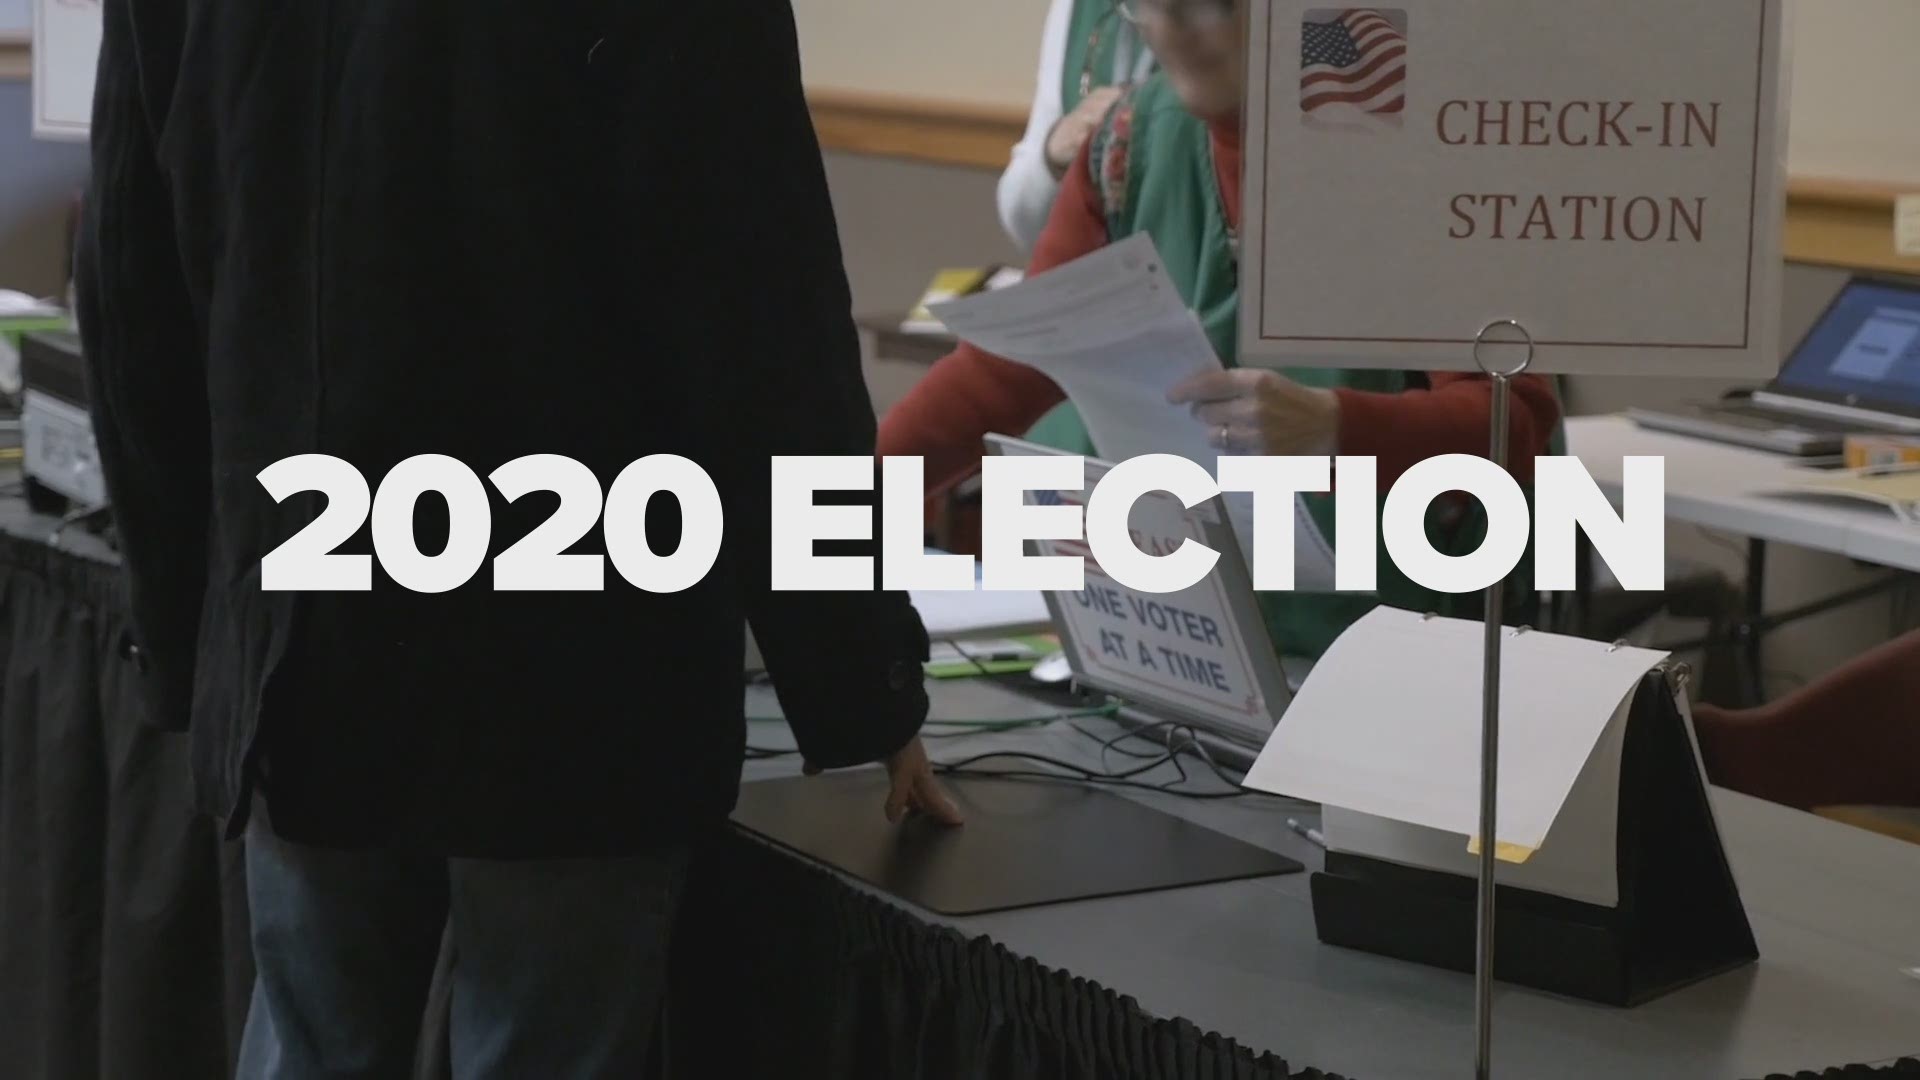 While most of the attention will be on the Presidential election, the 2020 Congressional election is enormously consequential.